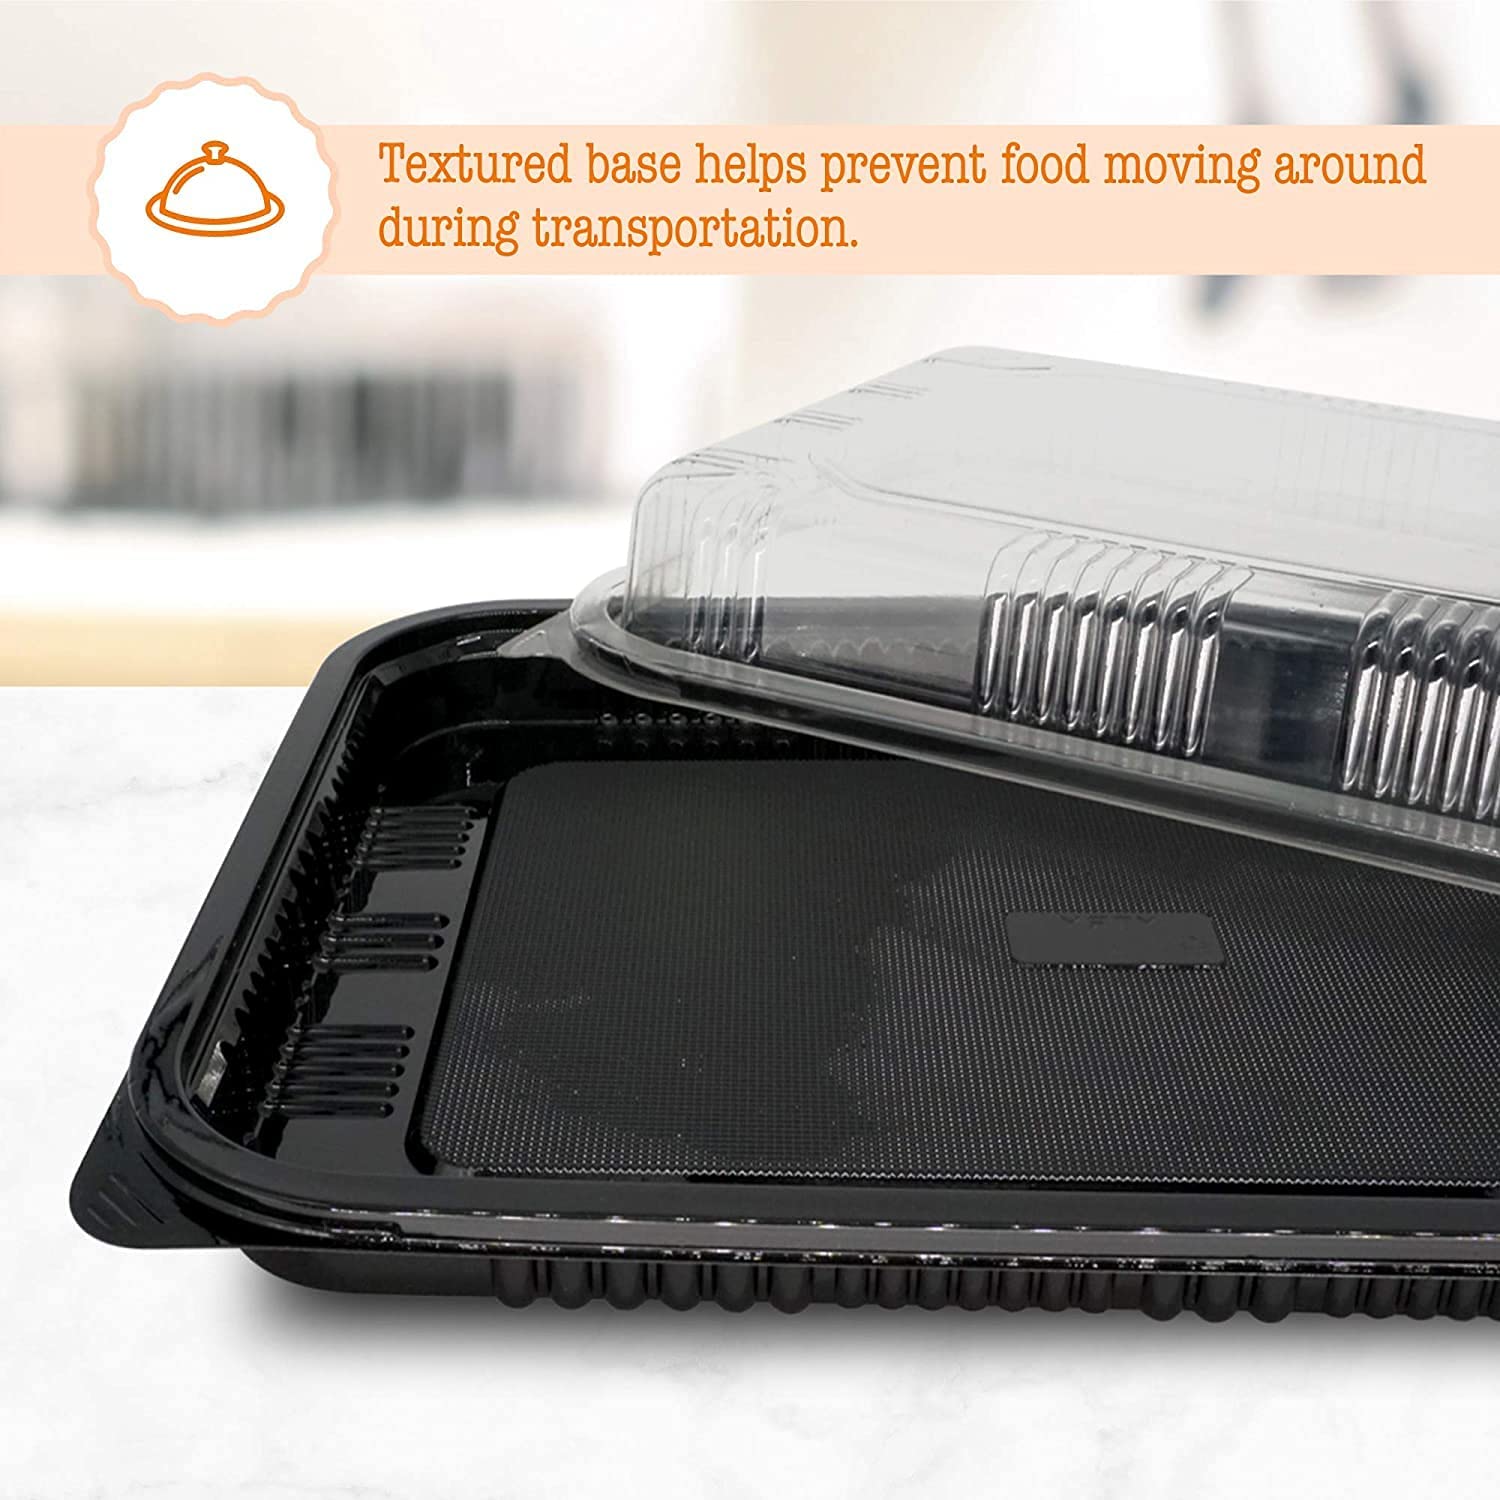 lose-up view of the textured base of sandwich tray with lid, designed to prevent food from moving during transportation.